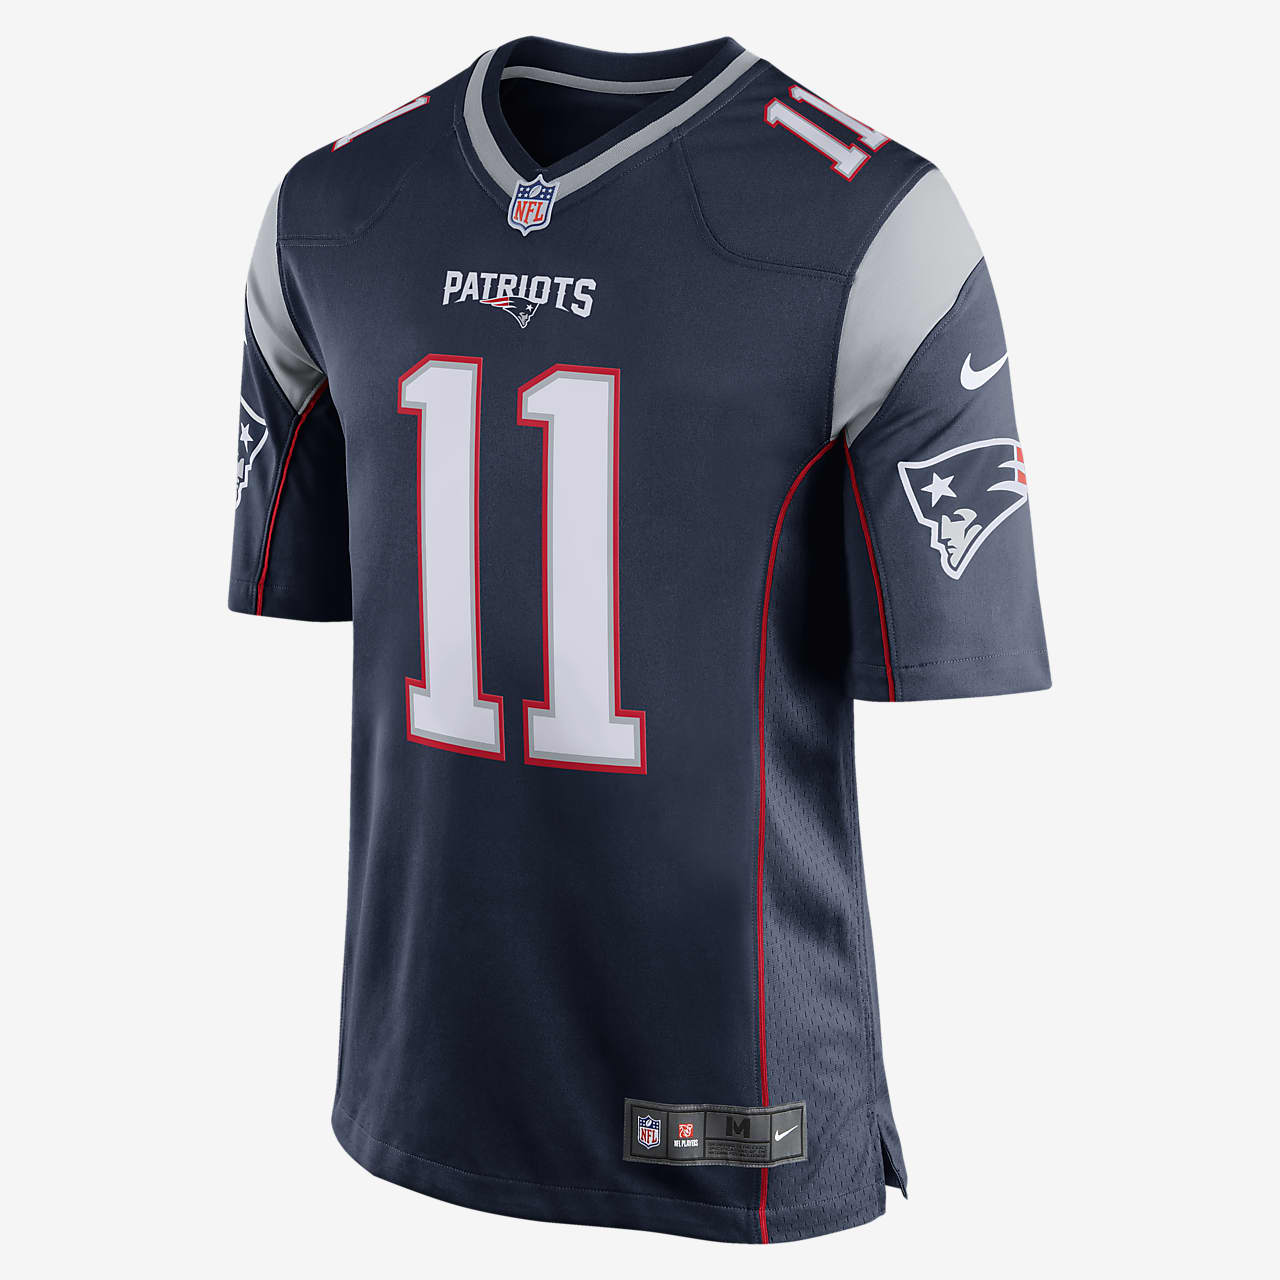 how much is a patriots jersey